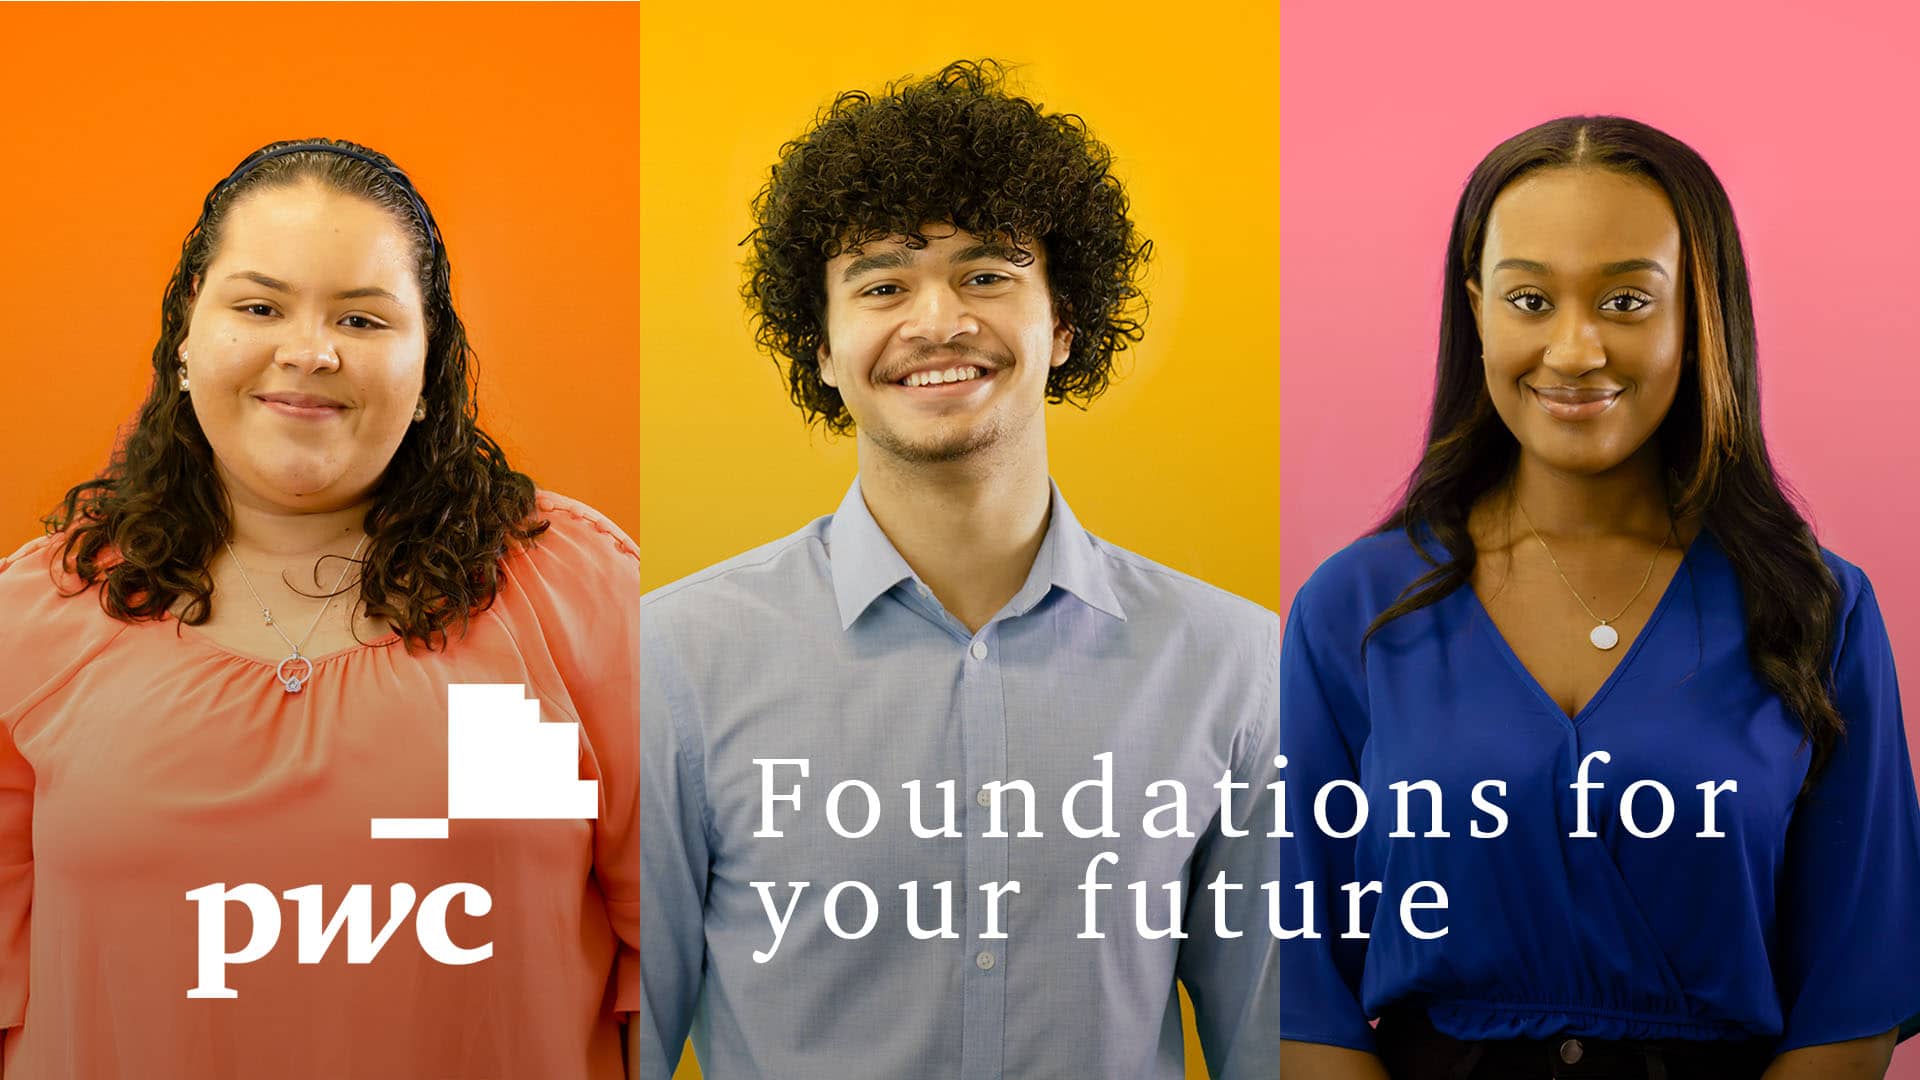 pwc foundation for your future corproate video production